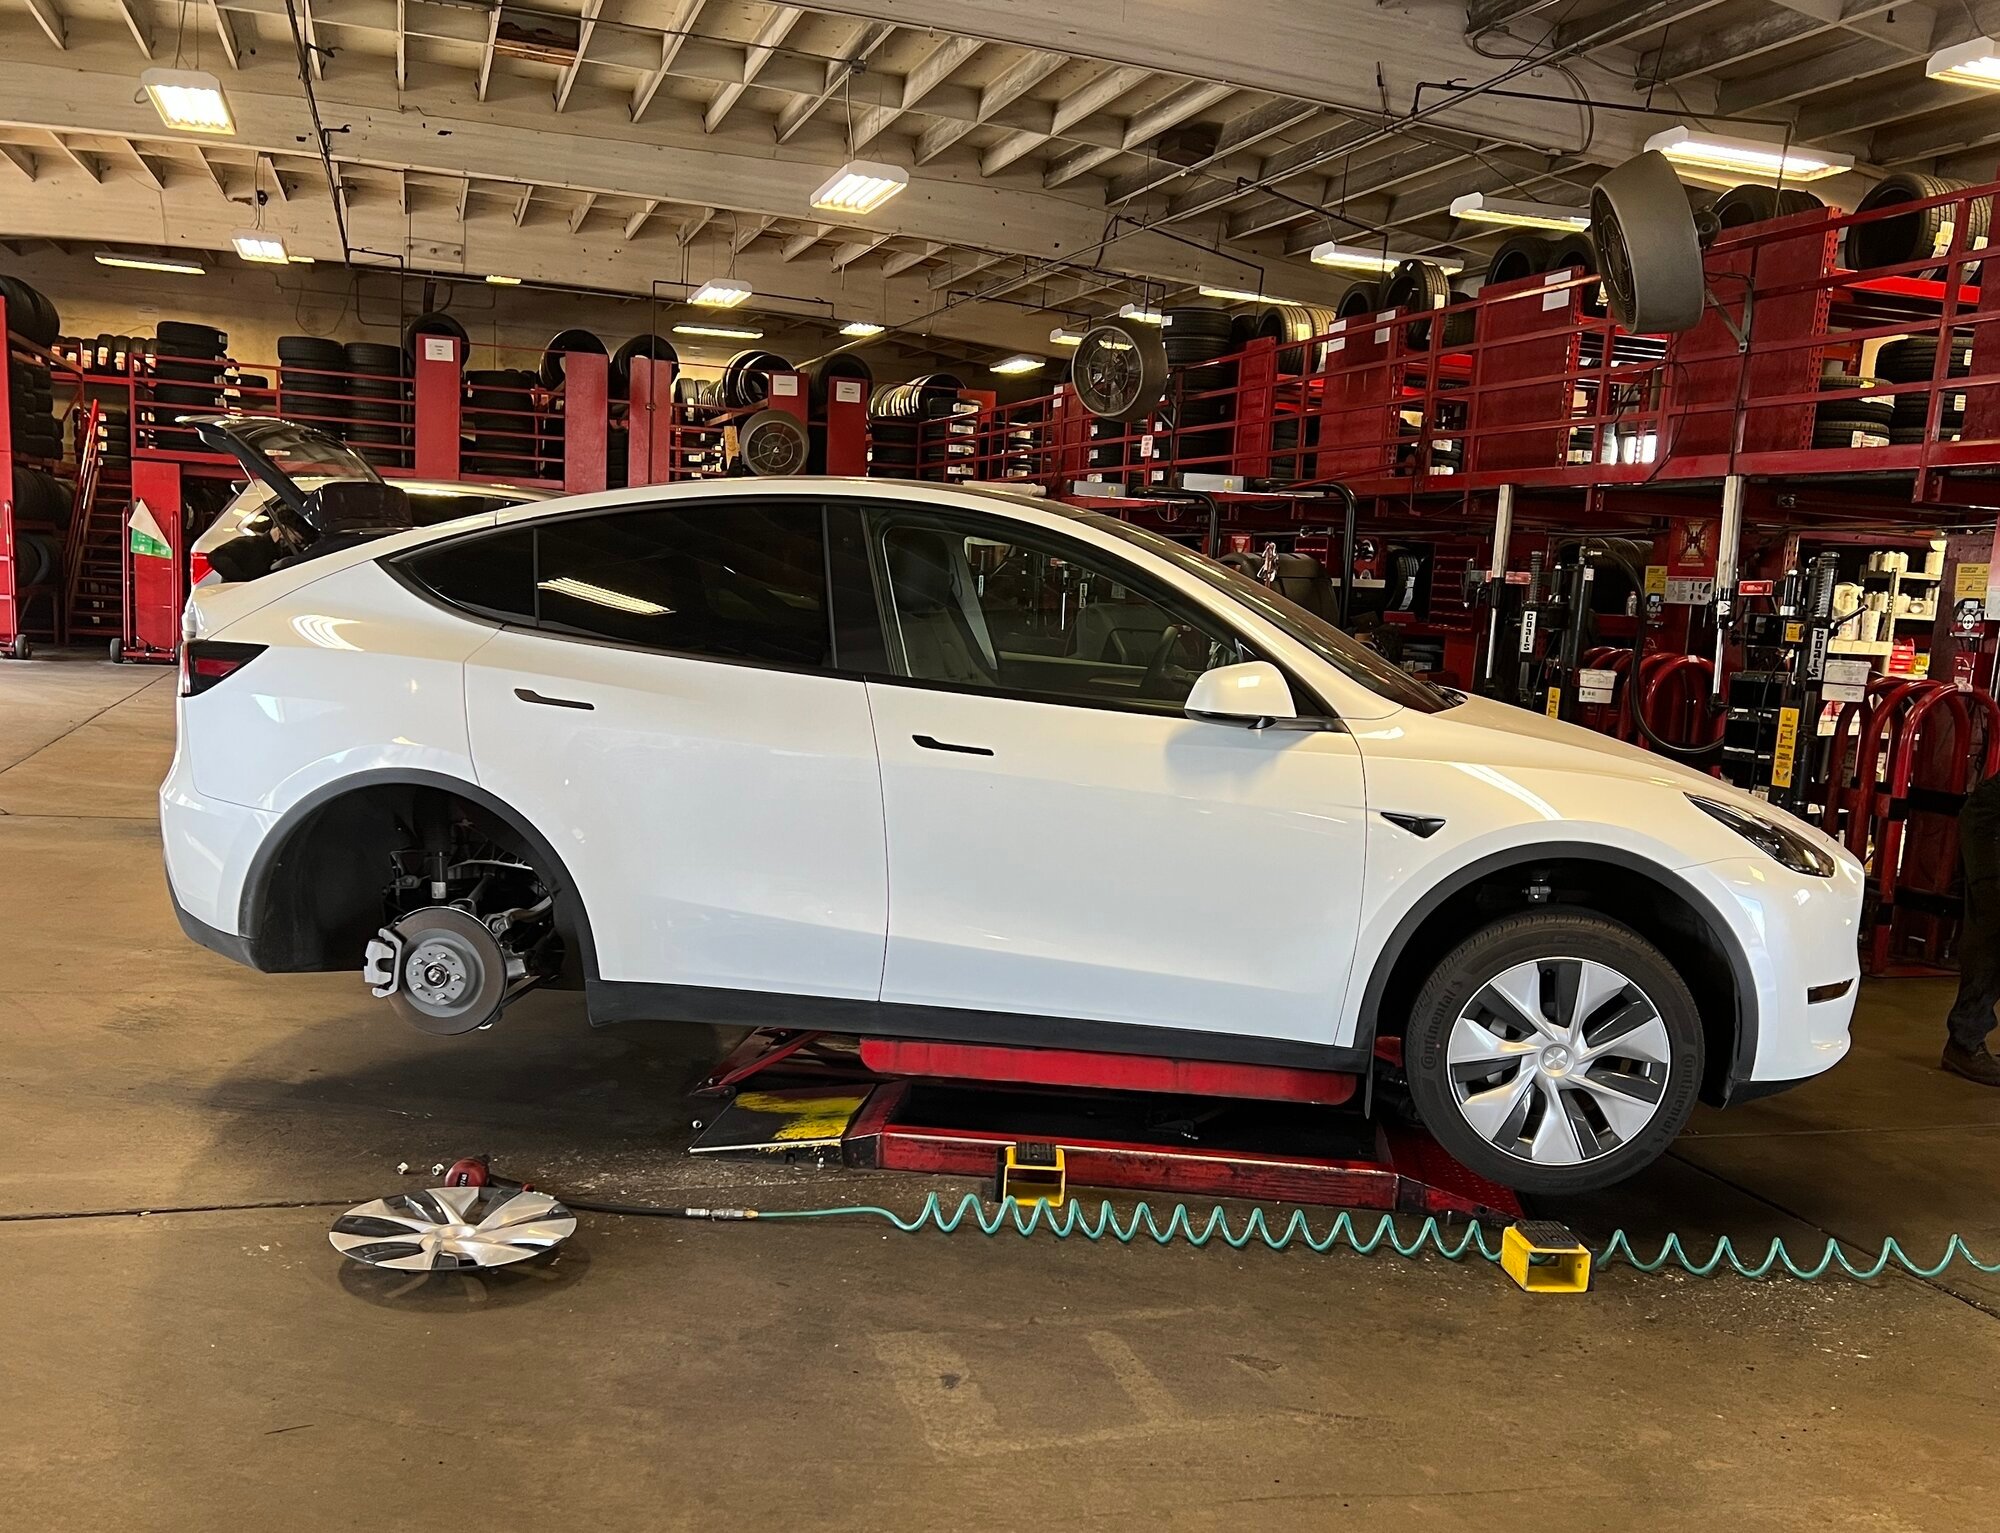 America's tire lifting model Y without jack pad - is it safe?